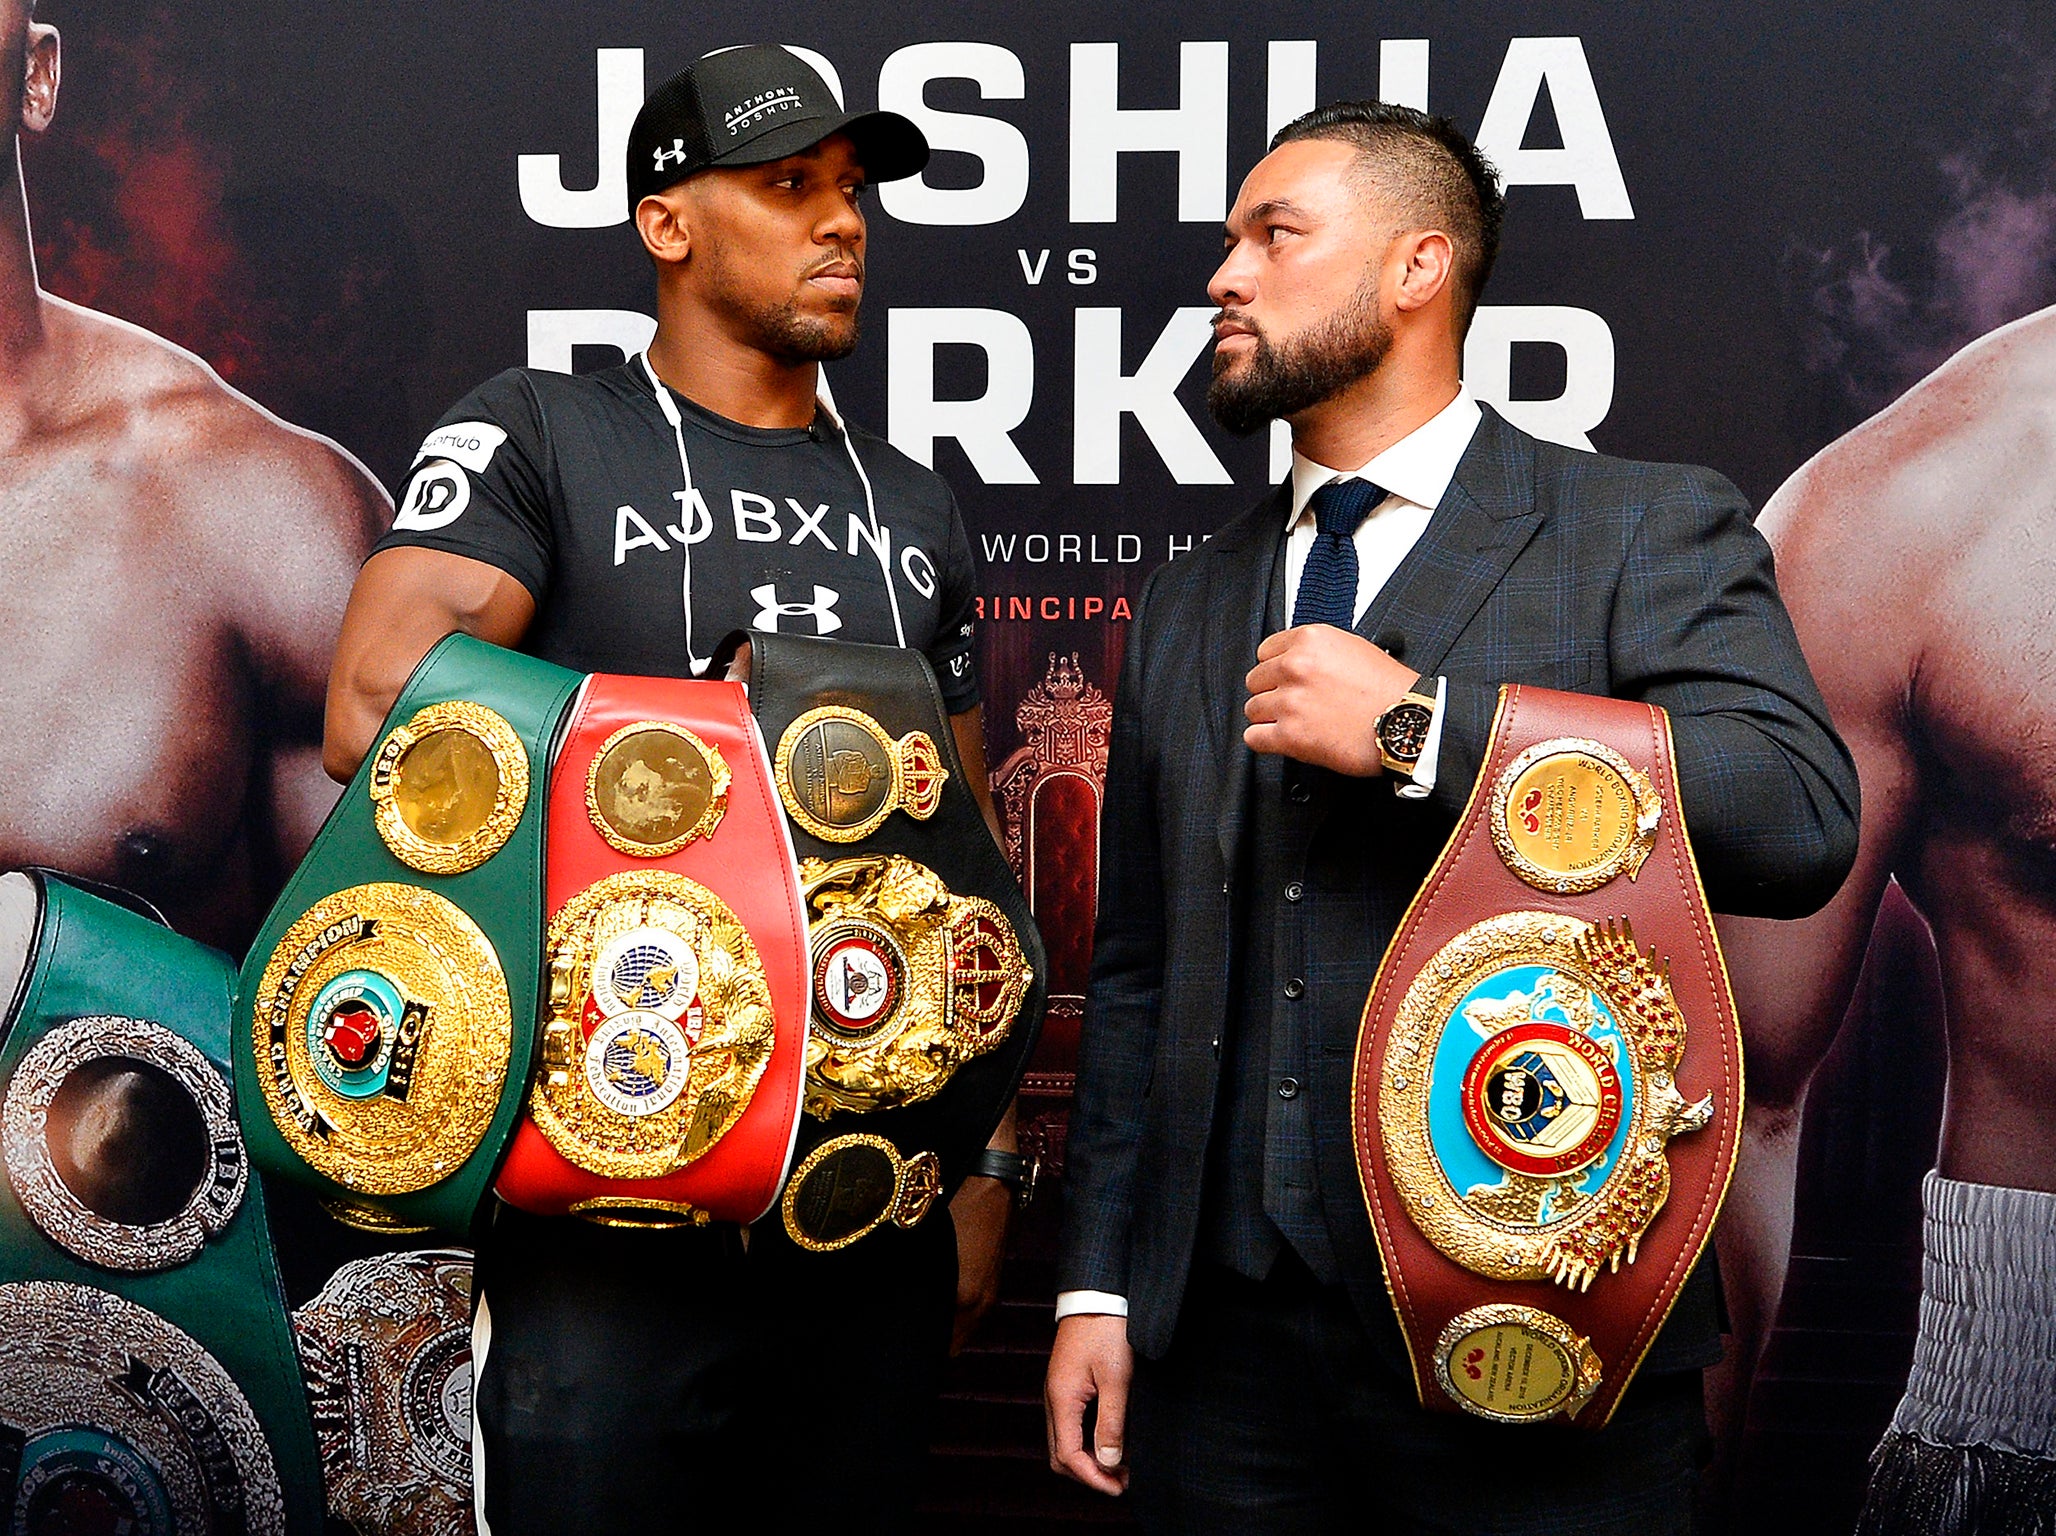 Anthony Joshua and Joseph Parker will settle their differences on March 31